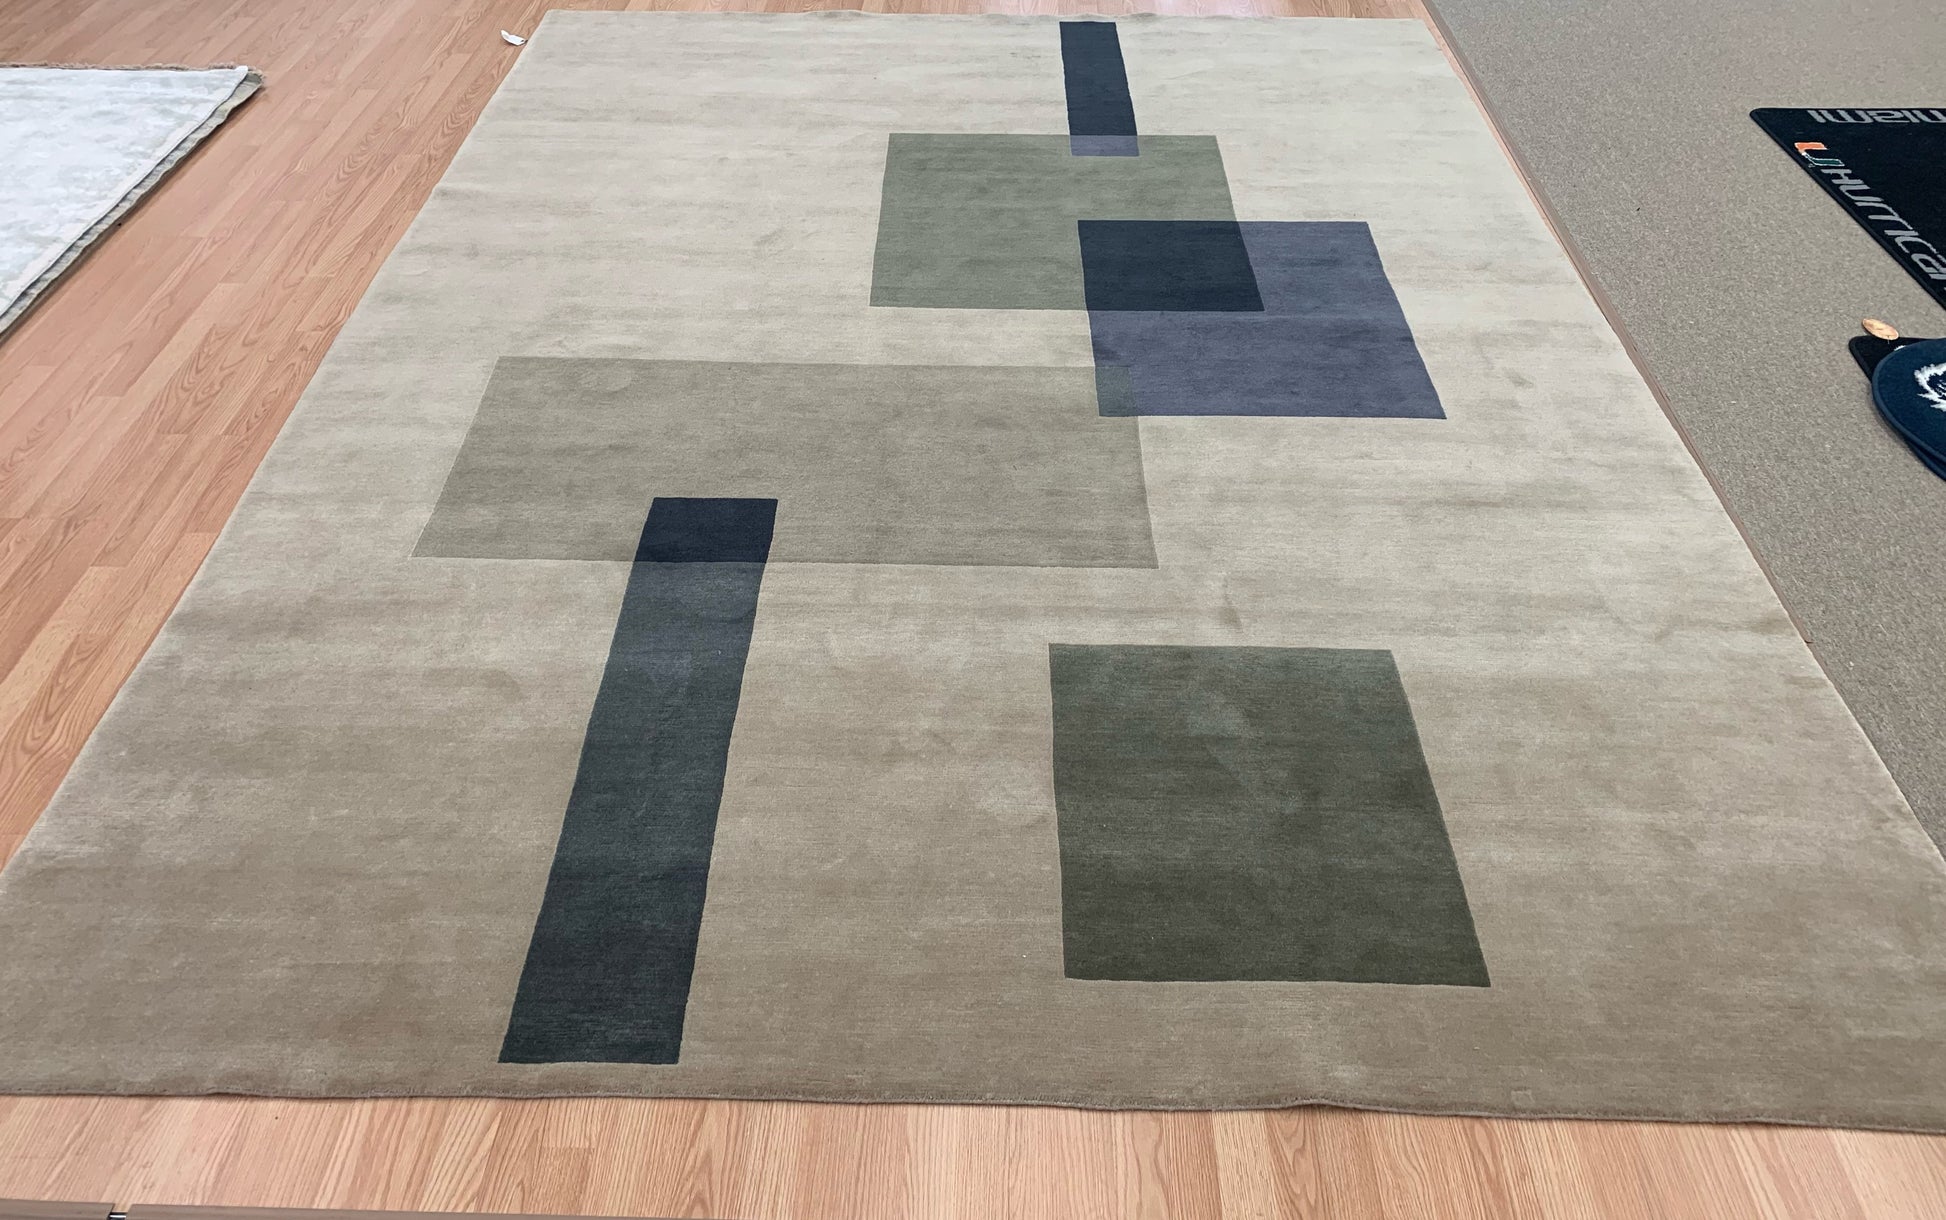 Vertical image of Hand-Knotted Wool Deco Tibetan Rug - Luxurious hand-knotted wool rug with intricate deco Tibetan design.